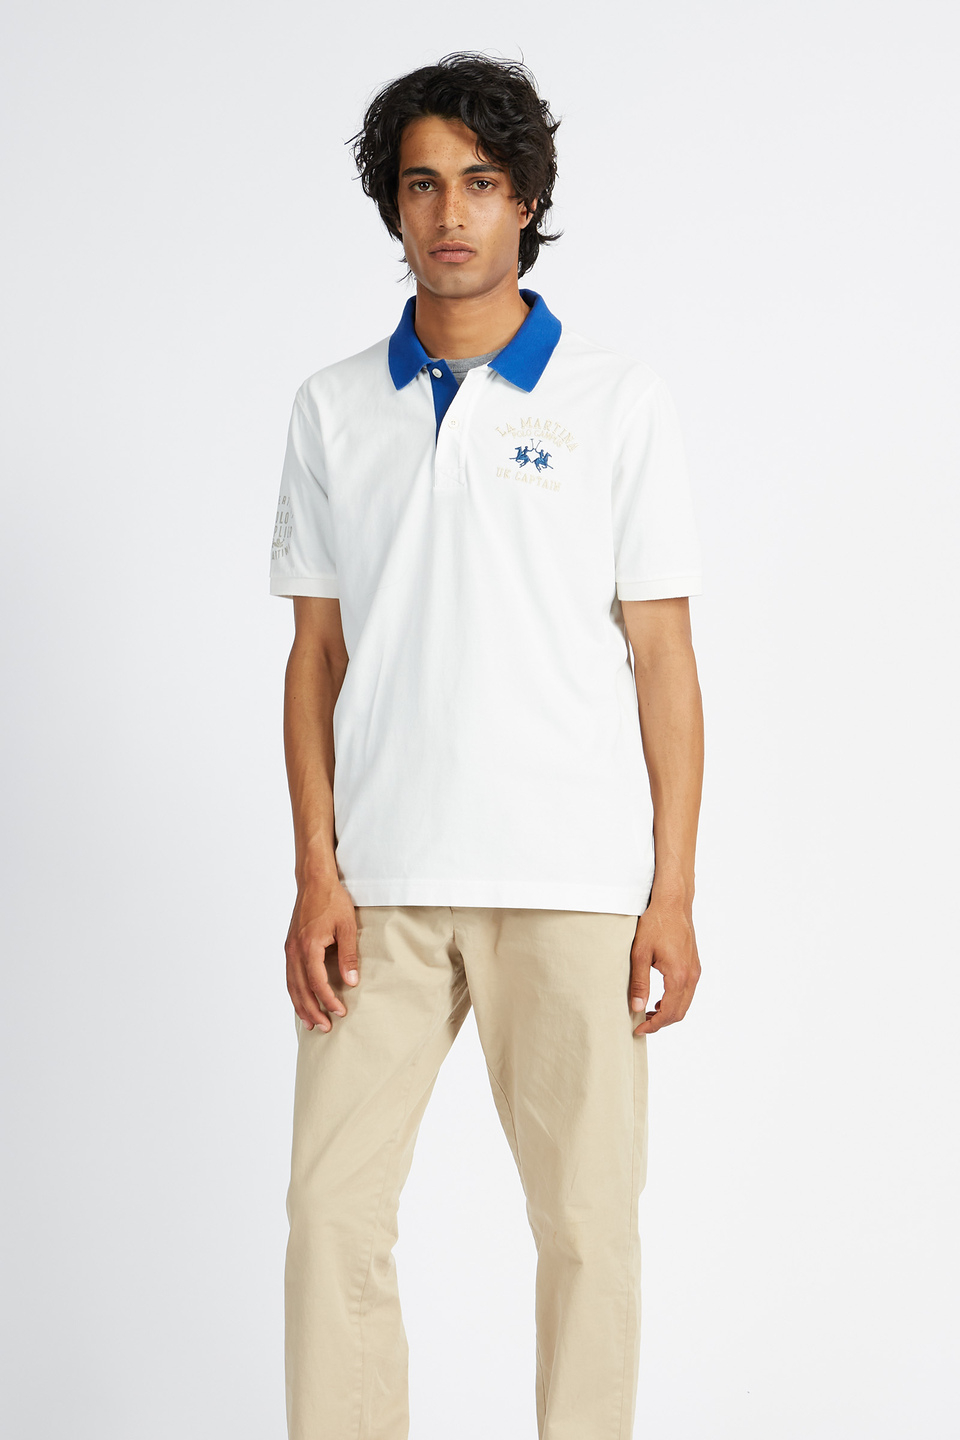 Polo Academy men's short-sleeved polo shirt with maxi patch in solid color and contrasting collar - Vedis | La Martina - Official Online Shop